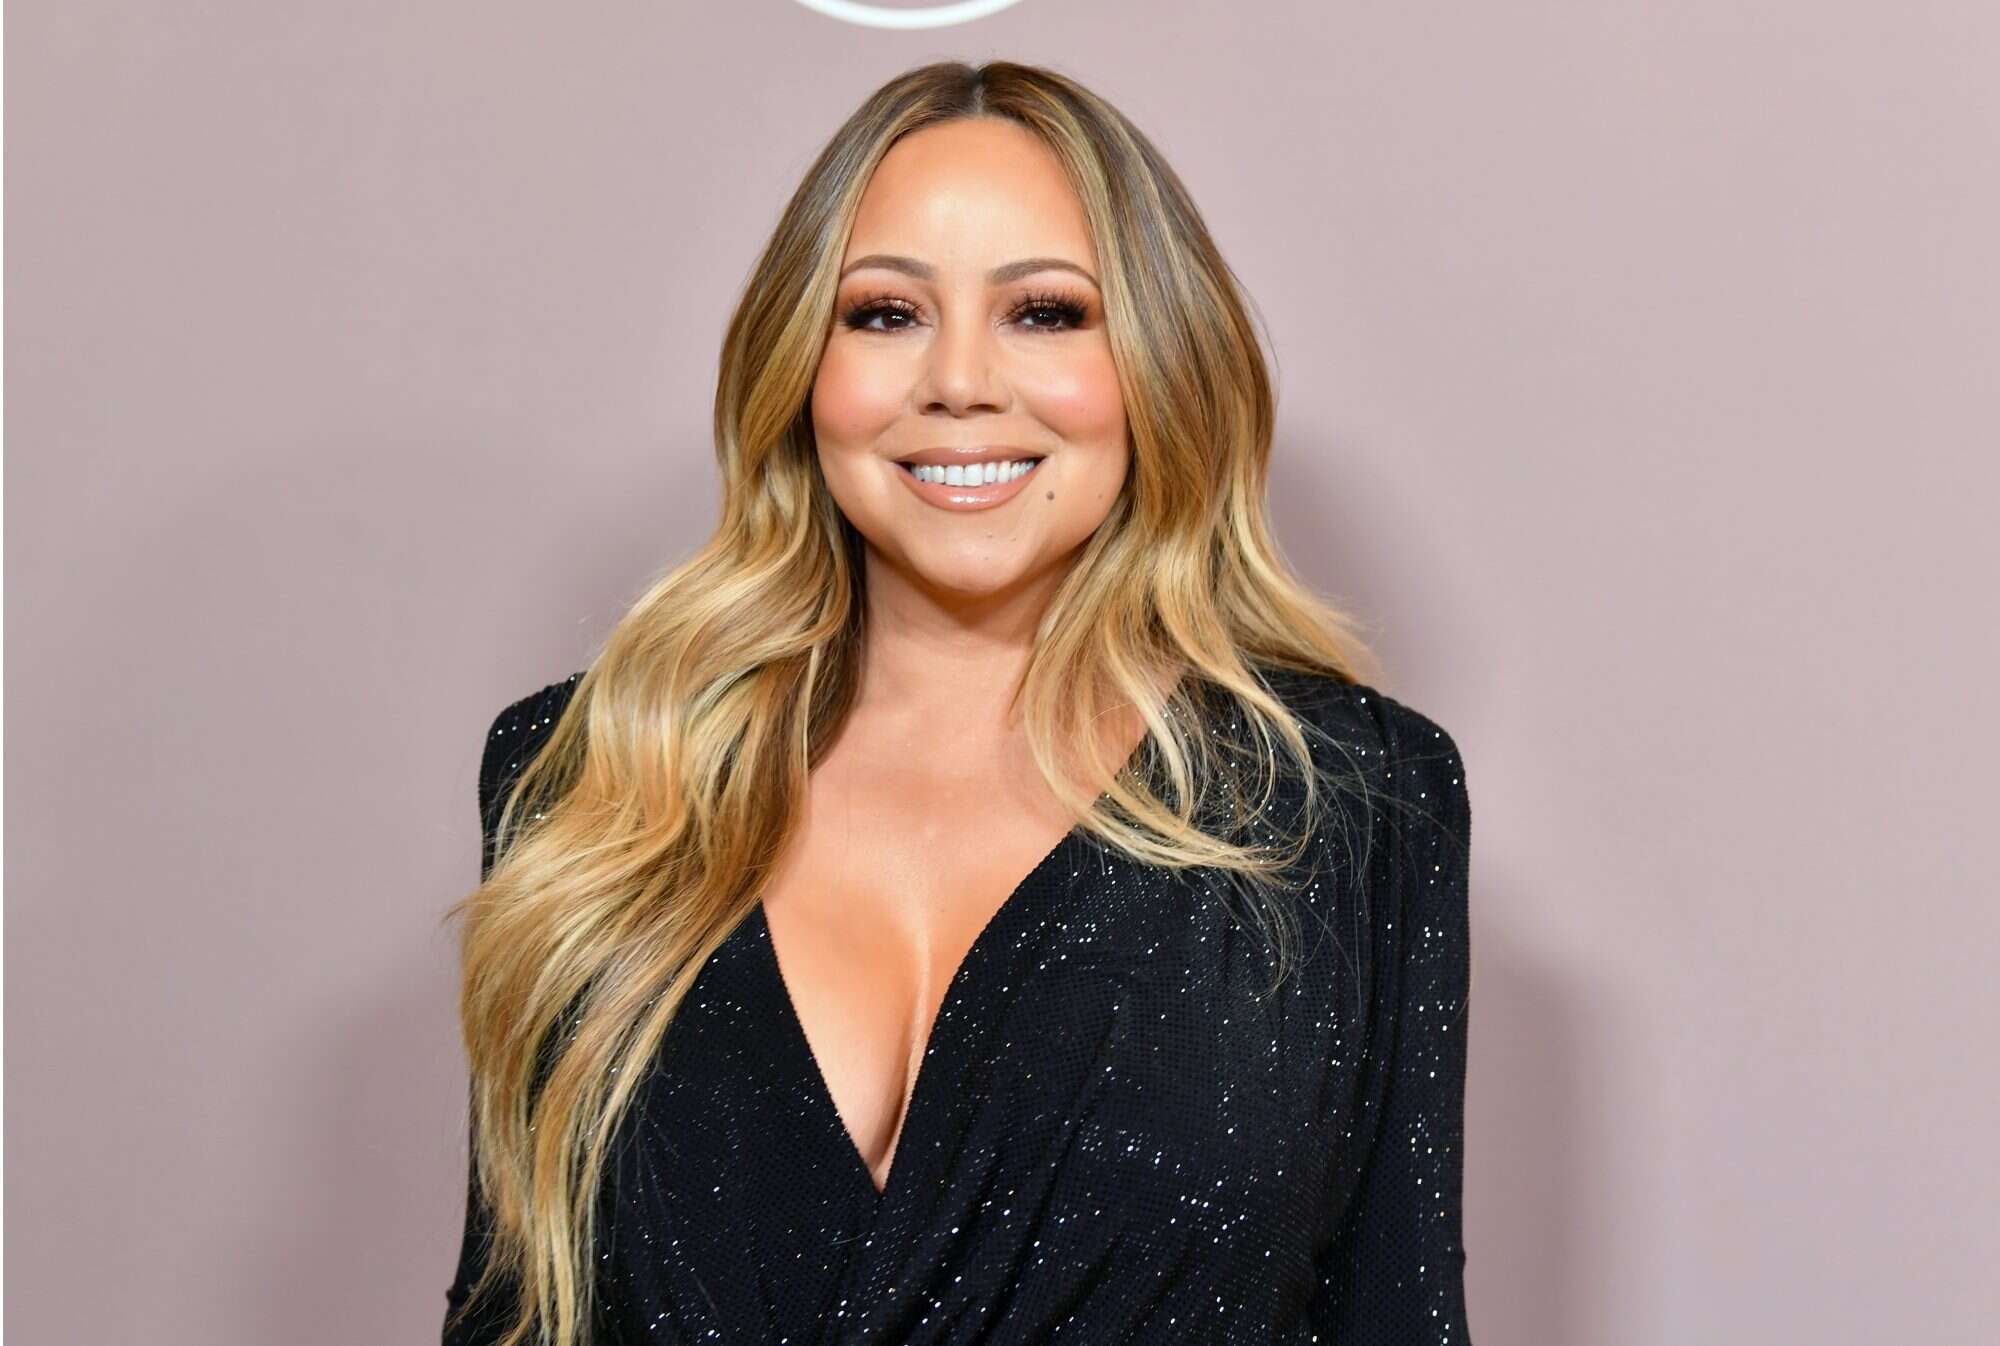 Mariah Carey's Memoir Will Reportedly Be Adapted For The Screen HelloG...